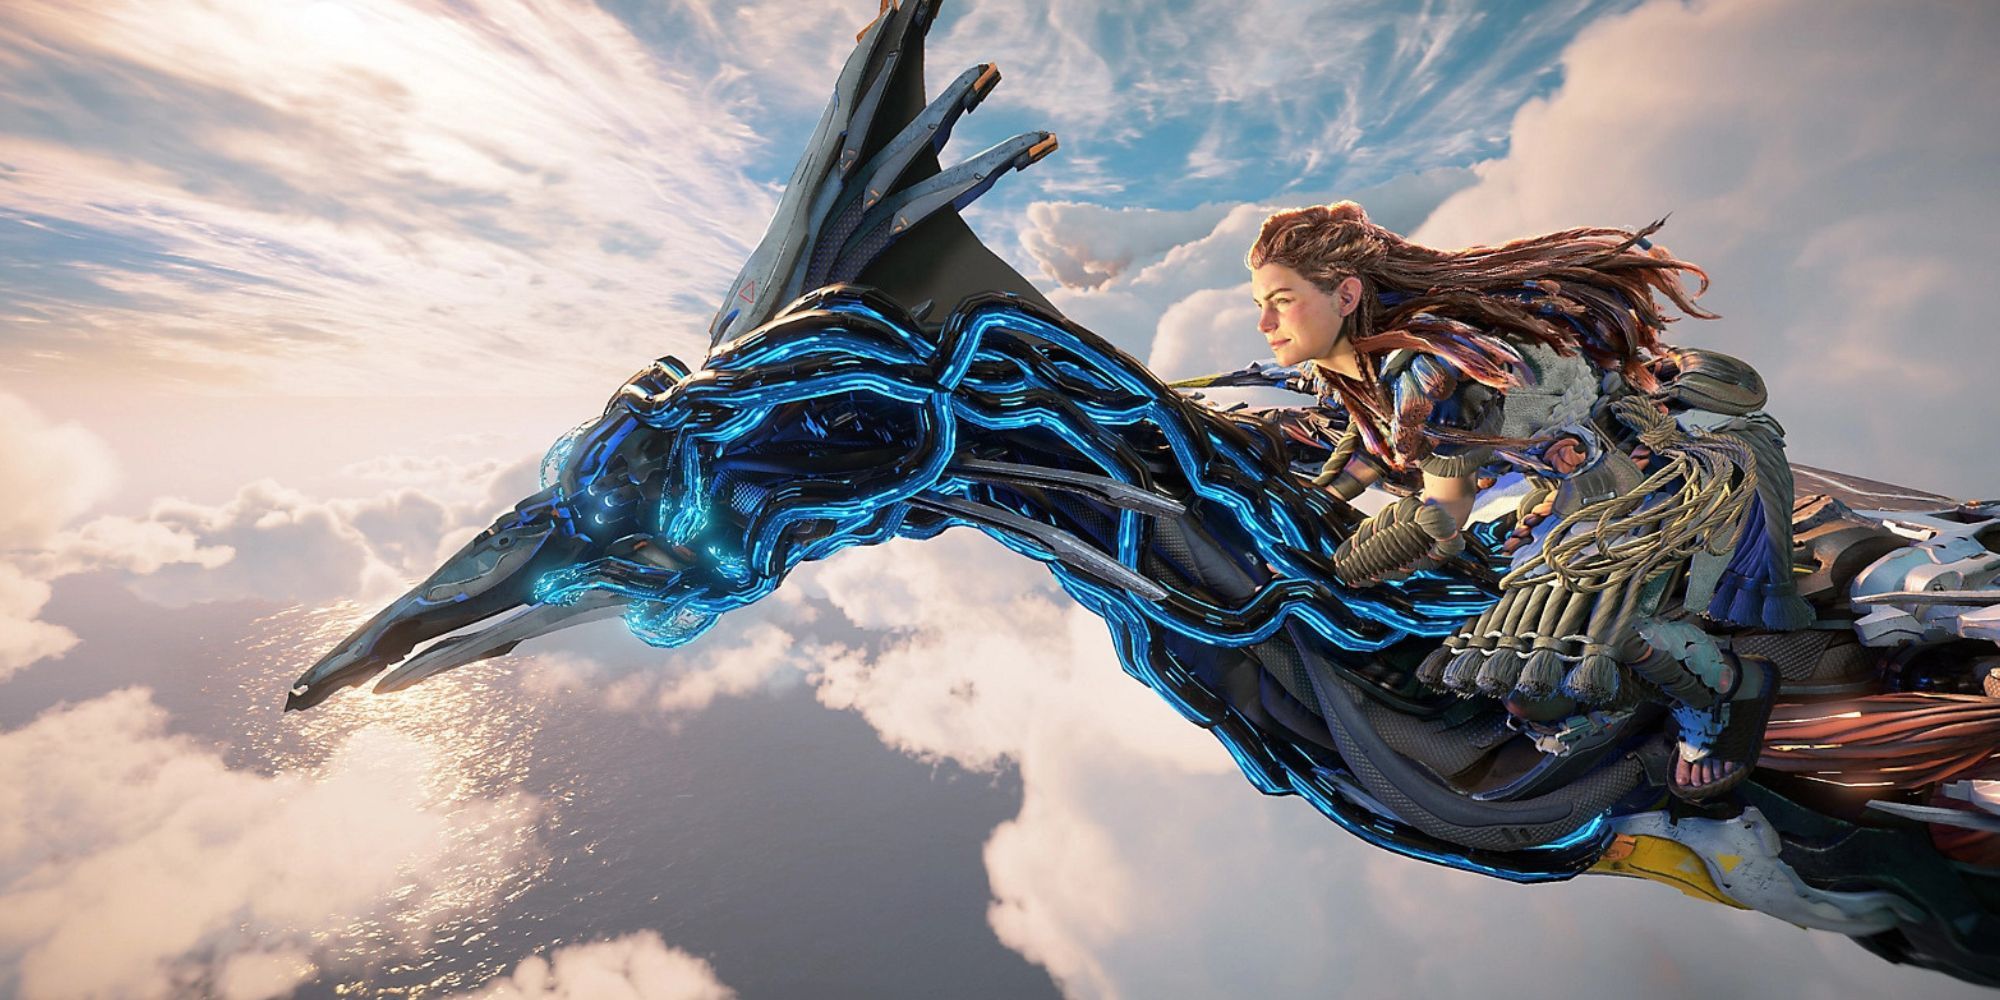 Aloy riding a flying mount in the Horizon Forbidden West trailer for Burning Shores 